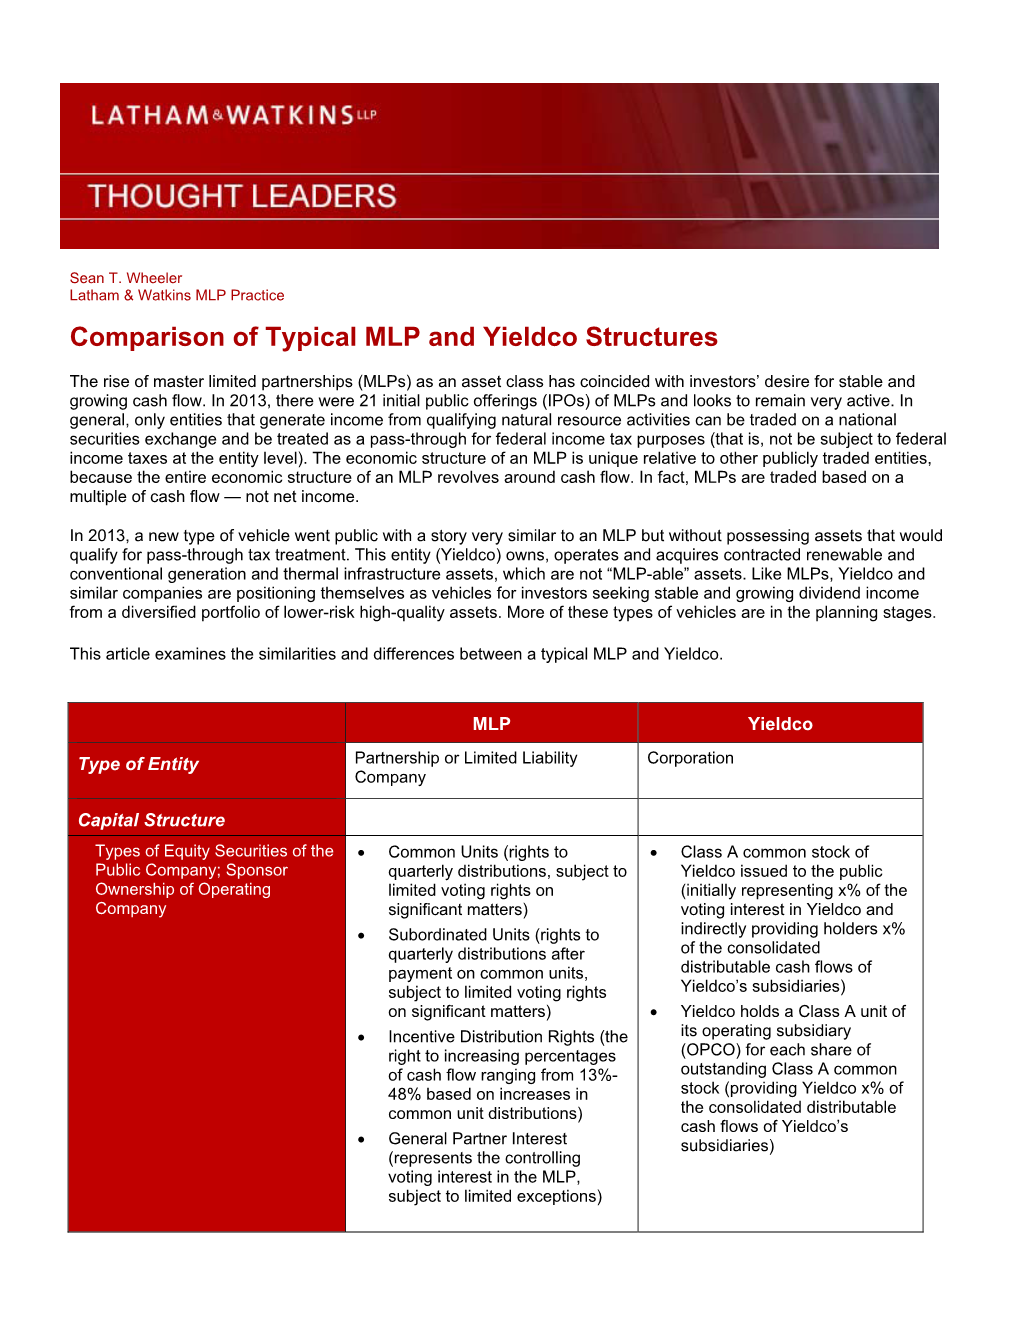 Comparison of Typical MLP and Yieldco Structures